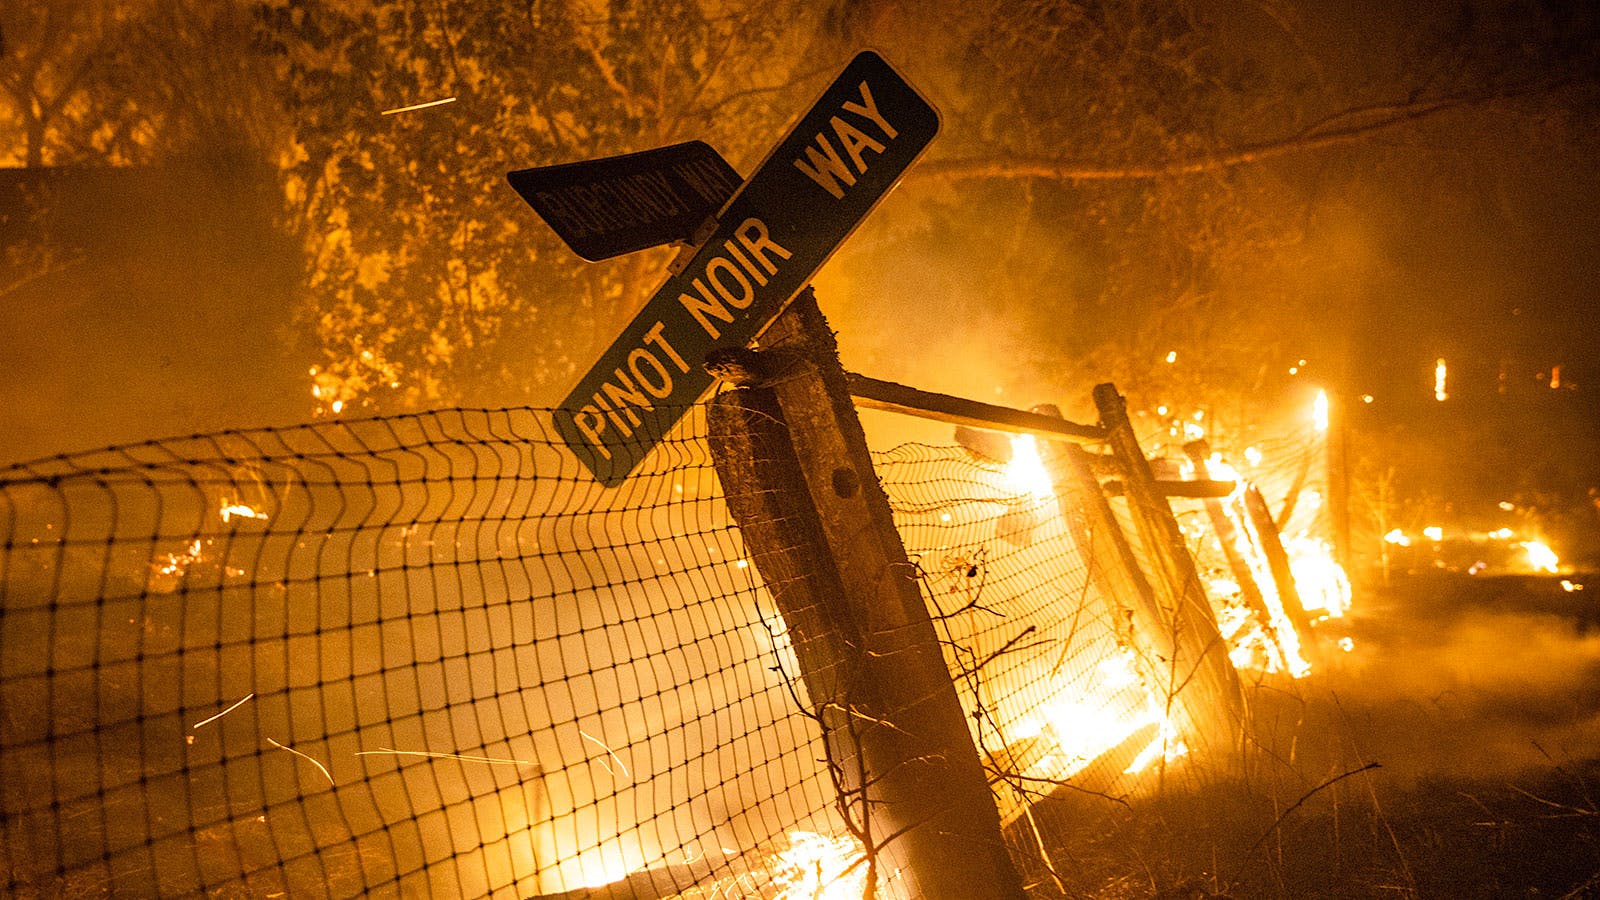 The Kincade Fire burns a fence and road sign in Windsor, Calif. on Sunday, Oct. 27, 2019.